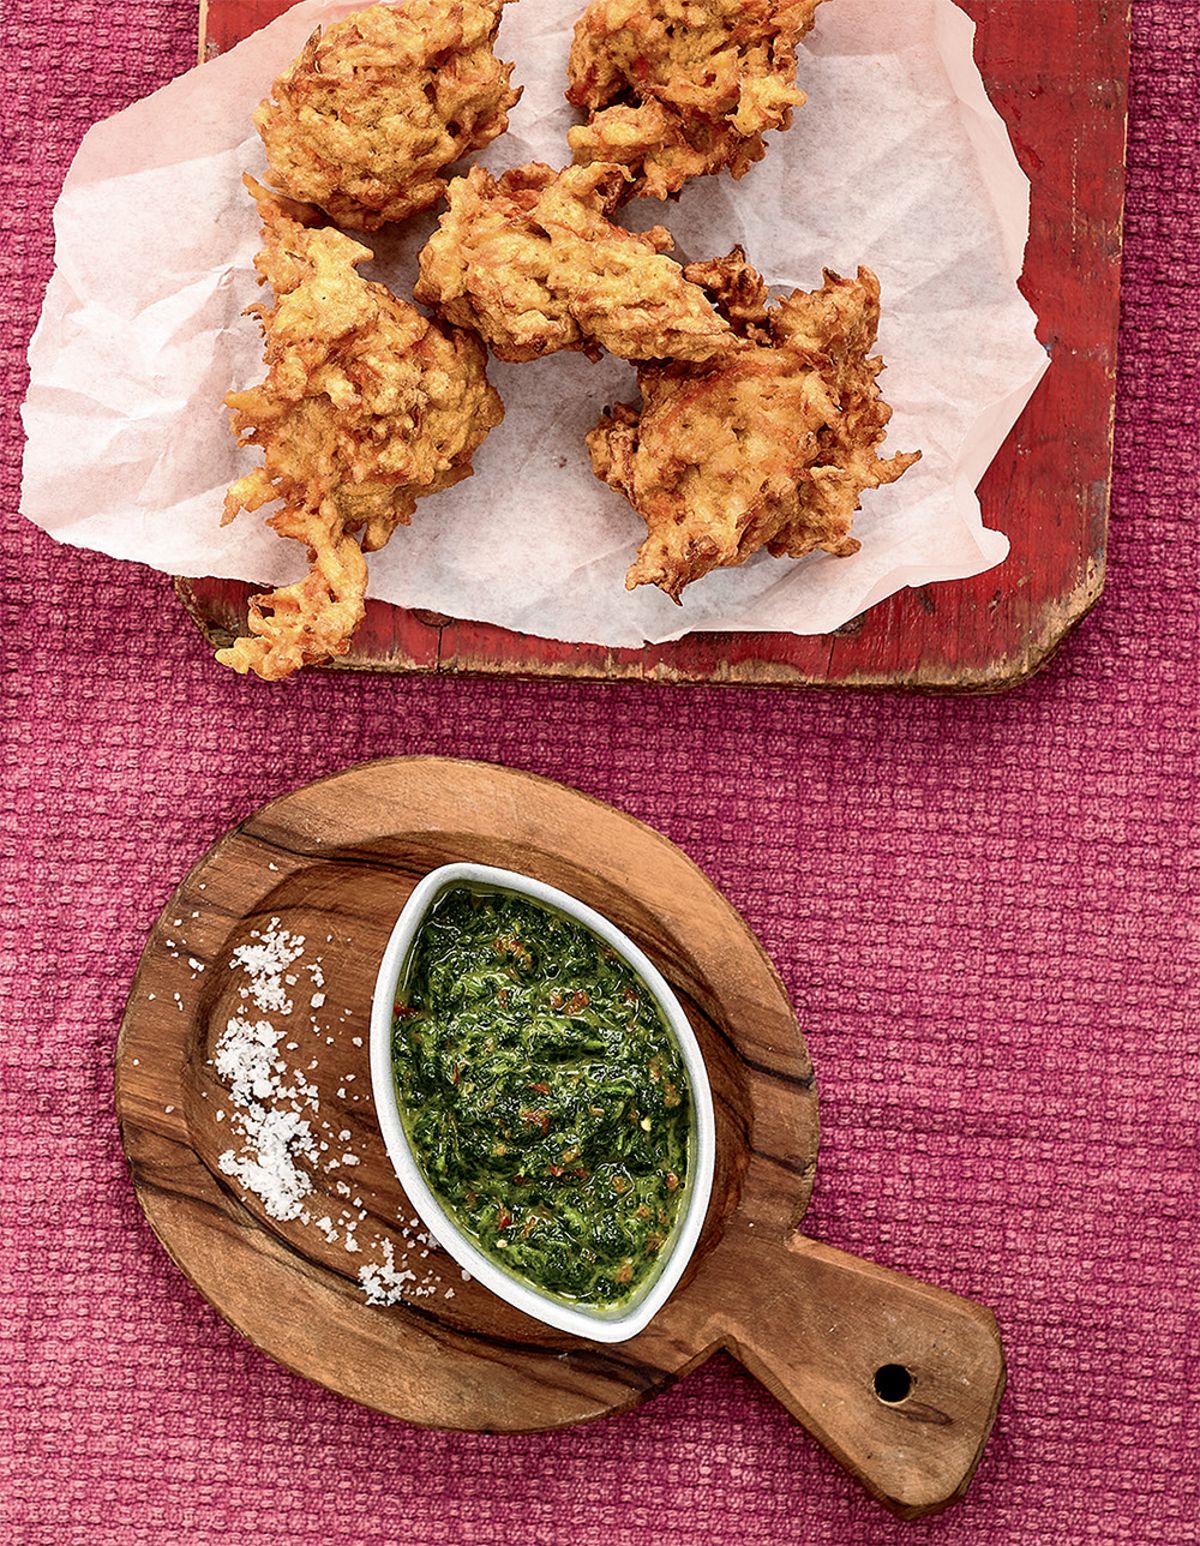 Curry, Carrot and Parsnip Bhajis with Coriander and Chilli Chutney